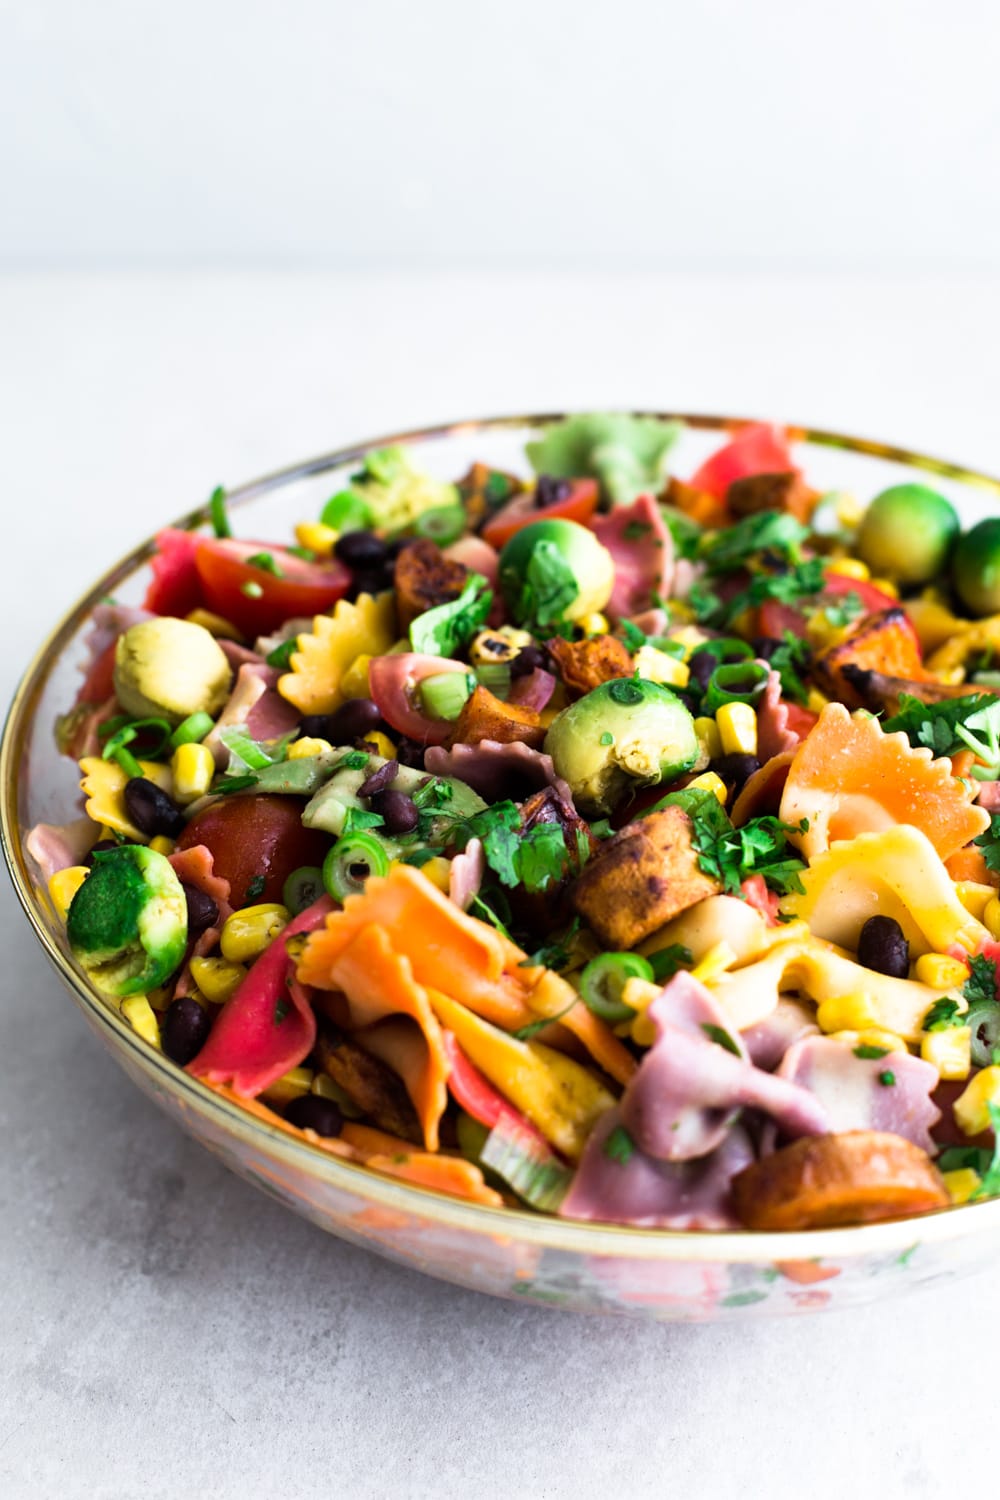 A Mexican inspired Vegan Southwestern Pasta Salad with Roasted Sweet Potato, Grilled Corn, Cherry Tomatoes, Black Beans & a Cumin Lime Vinaigrette. #healthy #vegan #pasta #salad #southwestern #mexican #corn #rainbow #salad #vegetarian #healthyrecipe